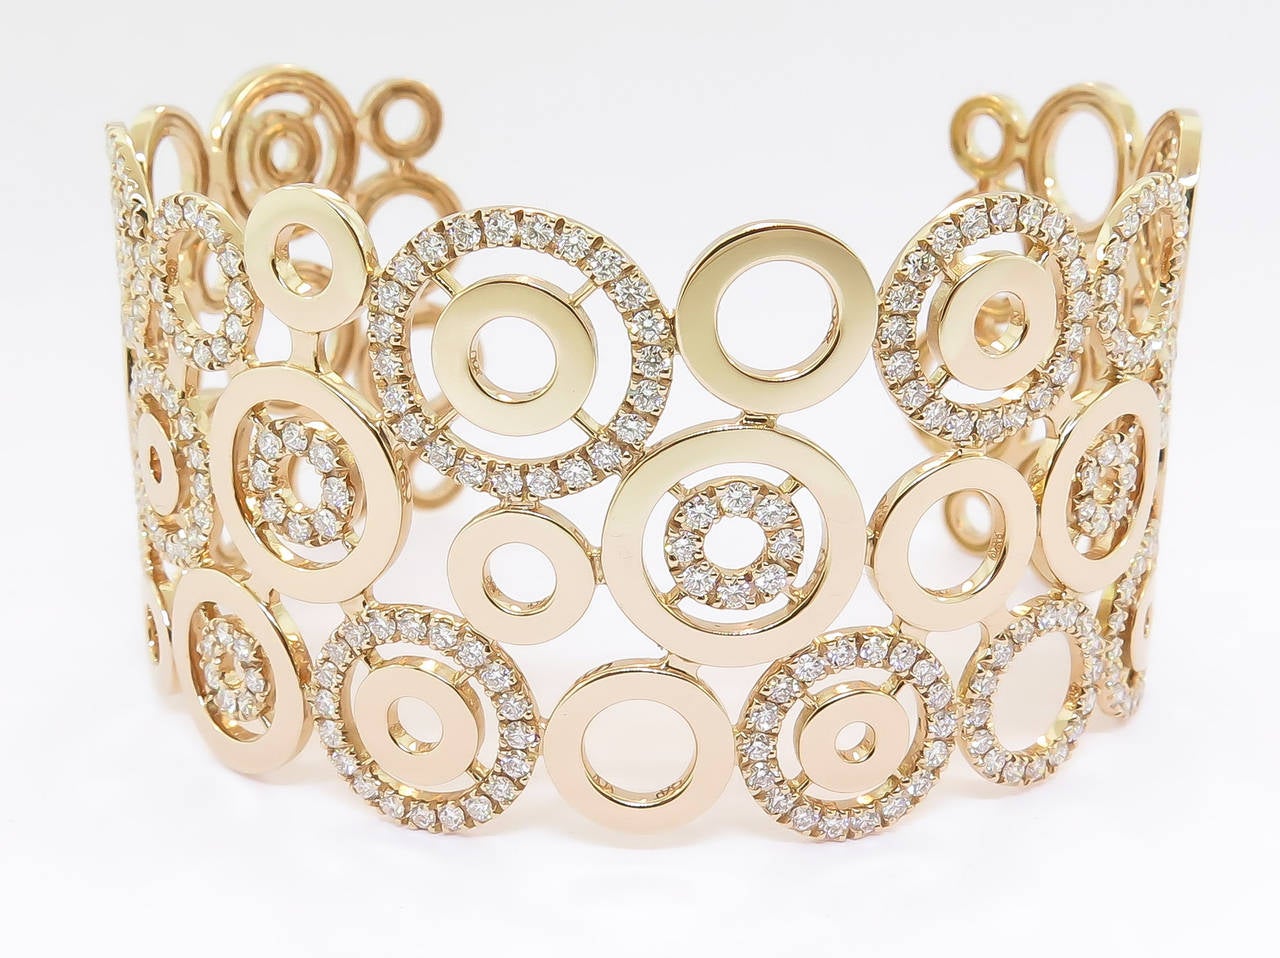 Magnificent design...Circles all over the cuff bracelet with multiple Diamond circles alternating inside and out making this bracelet open and airy.  
Beautifully handcrafted in Italy, utilizing 18k rose gold, and adorned with 3.70 carats of white